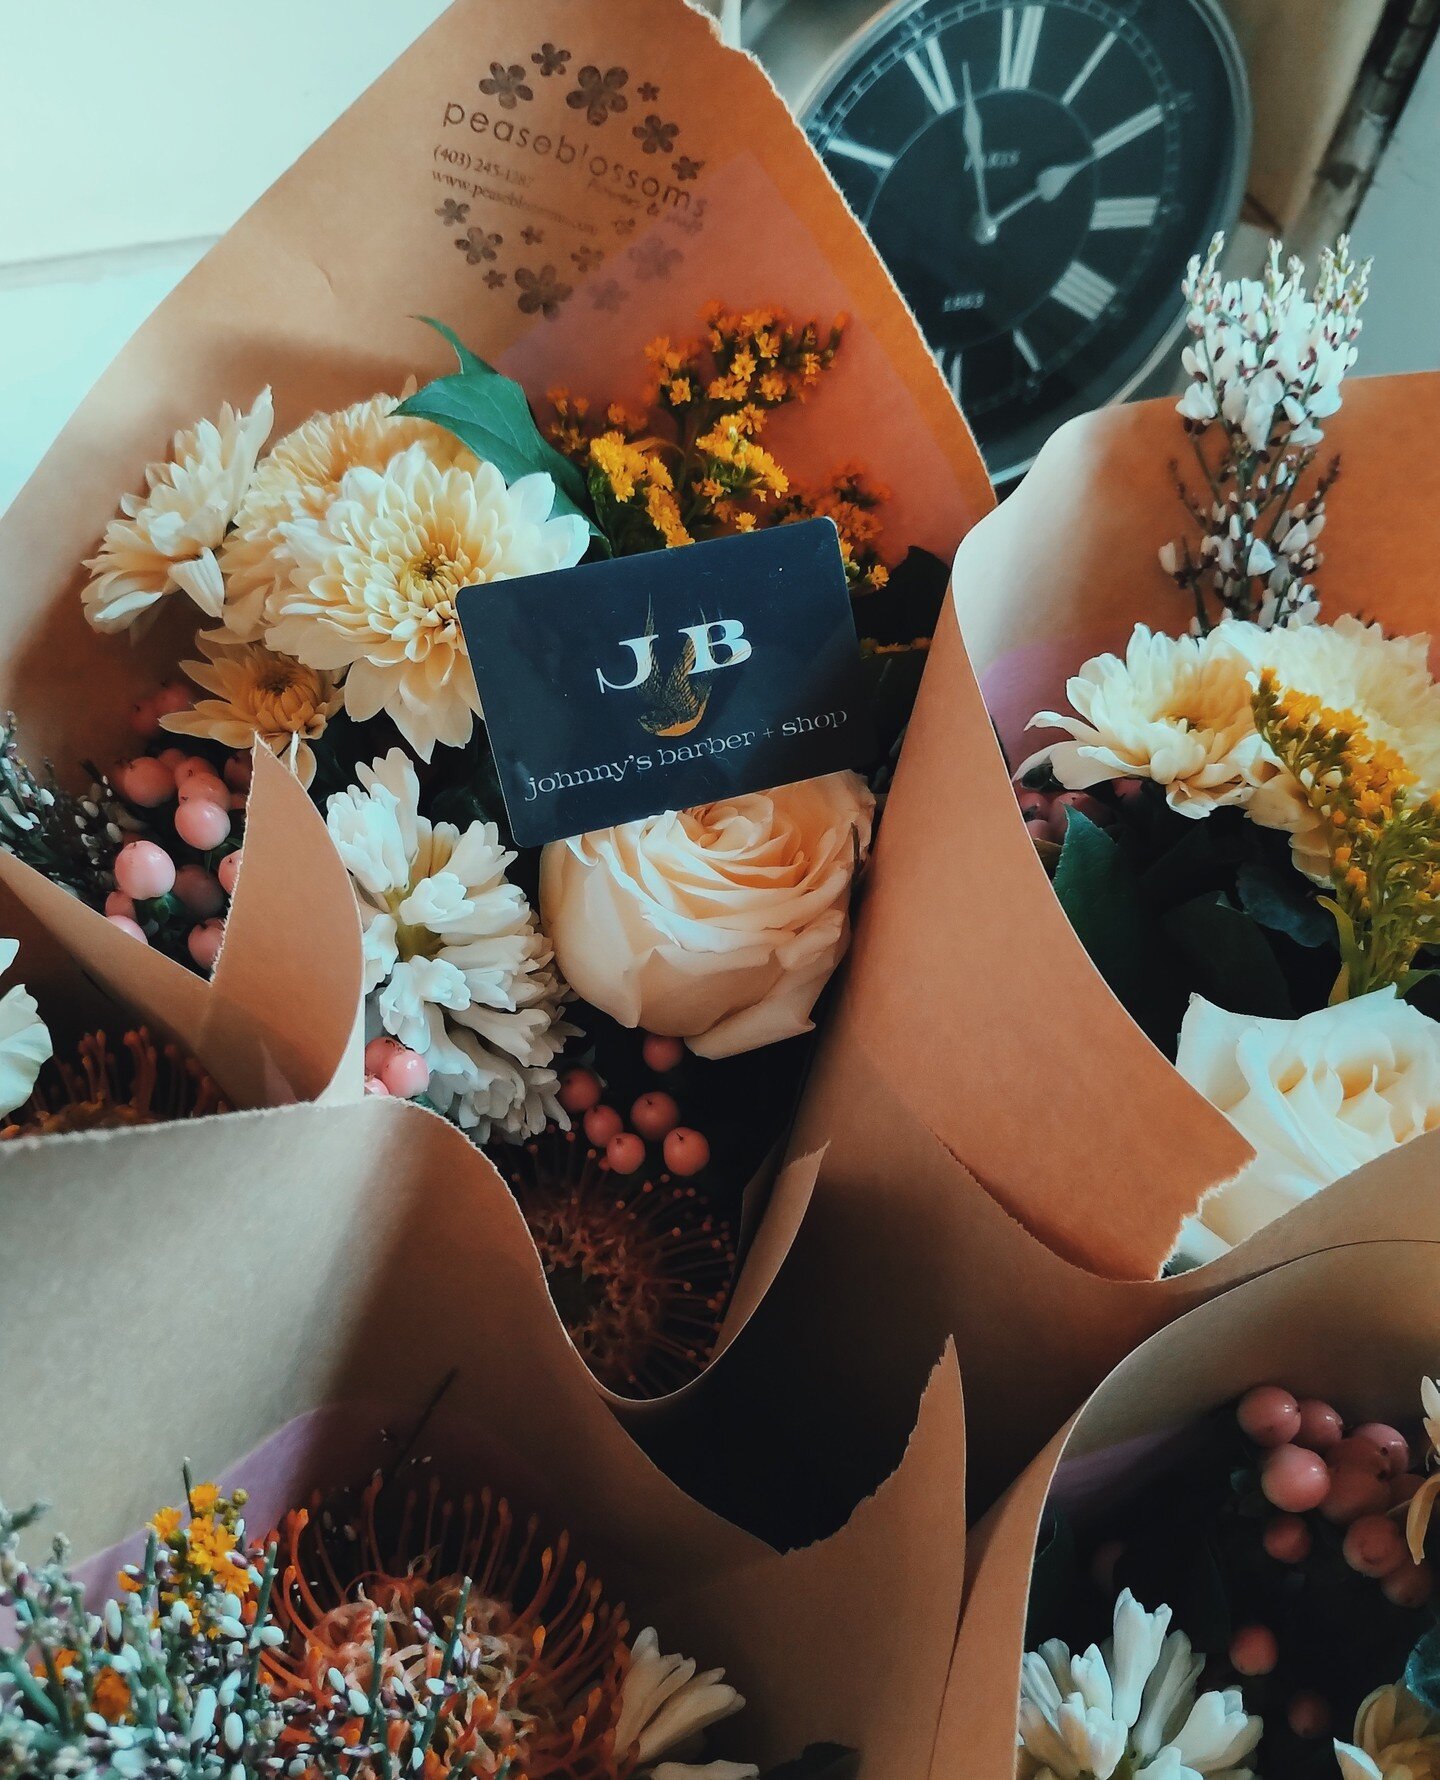 𝙵𝚘𝚛𝚐𝚎𝚝𝚝𝚒𝚗𝚐 𝚜𝚘𝚖𝚎𝚝𝚑𝚒𝚗𝚐? 💐⁠
⁠
Mother's Day is Sunday and we've got your last minute gifting covered. Pop by your preferred Johnny's location and grab a $55 or $75 bouquet courtesy of our friends at @peaseblossomsflowers (while suppli